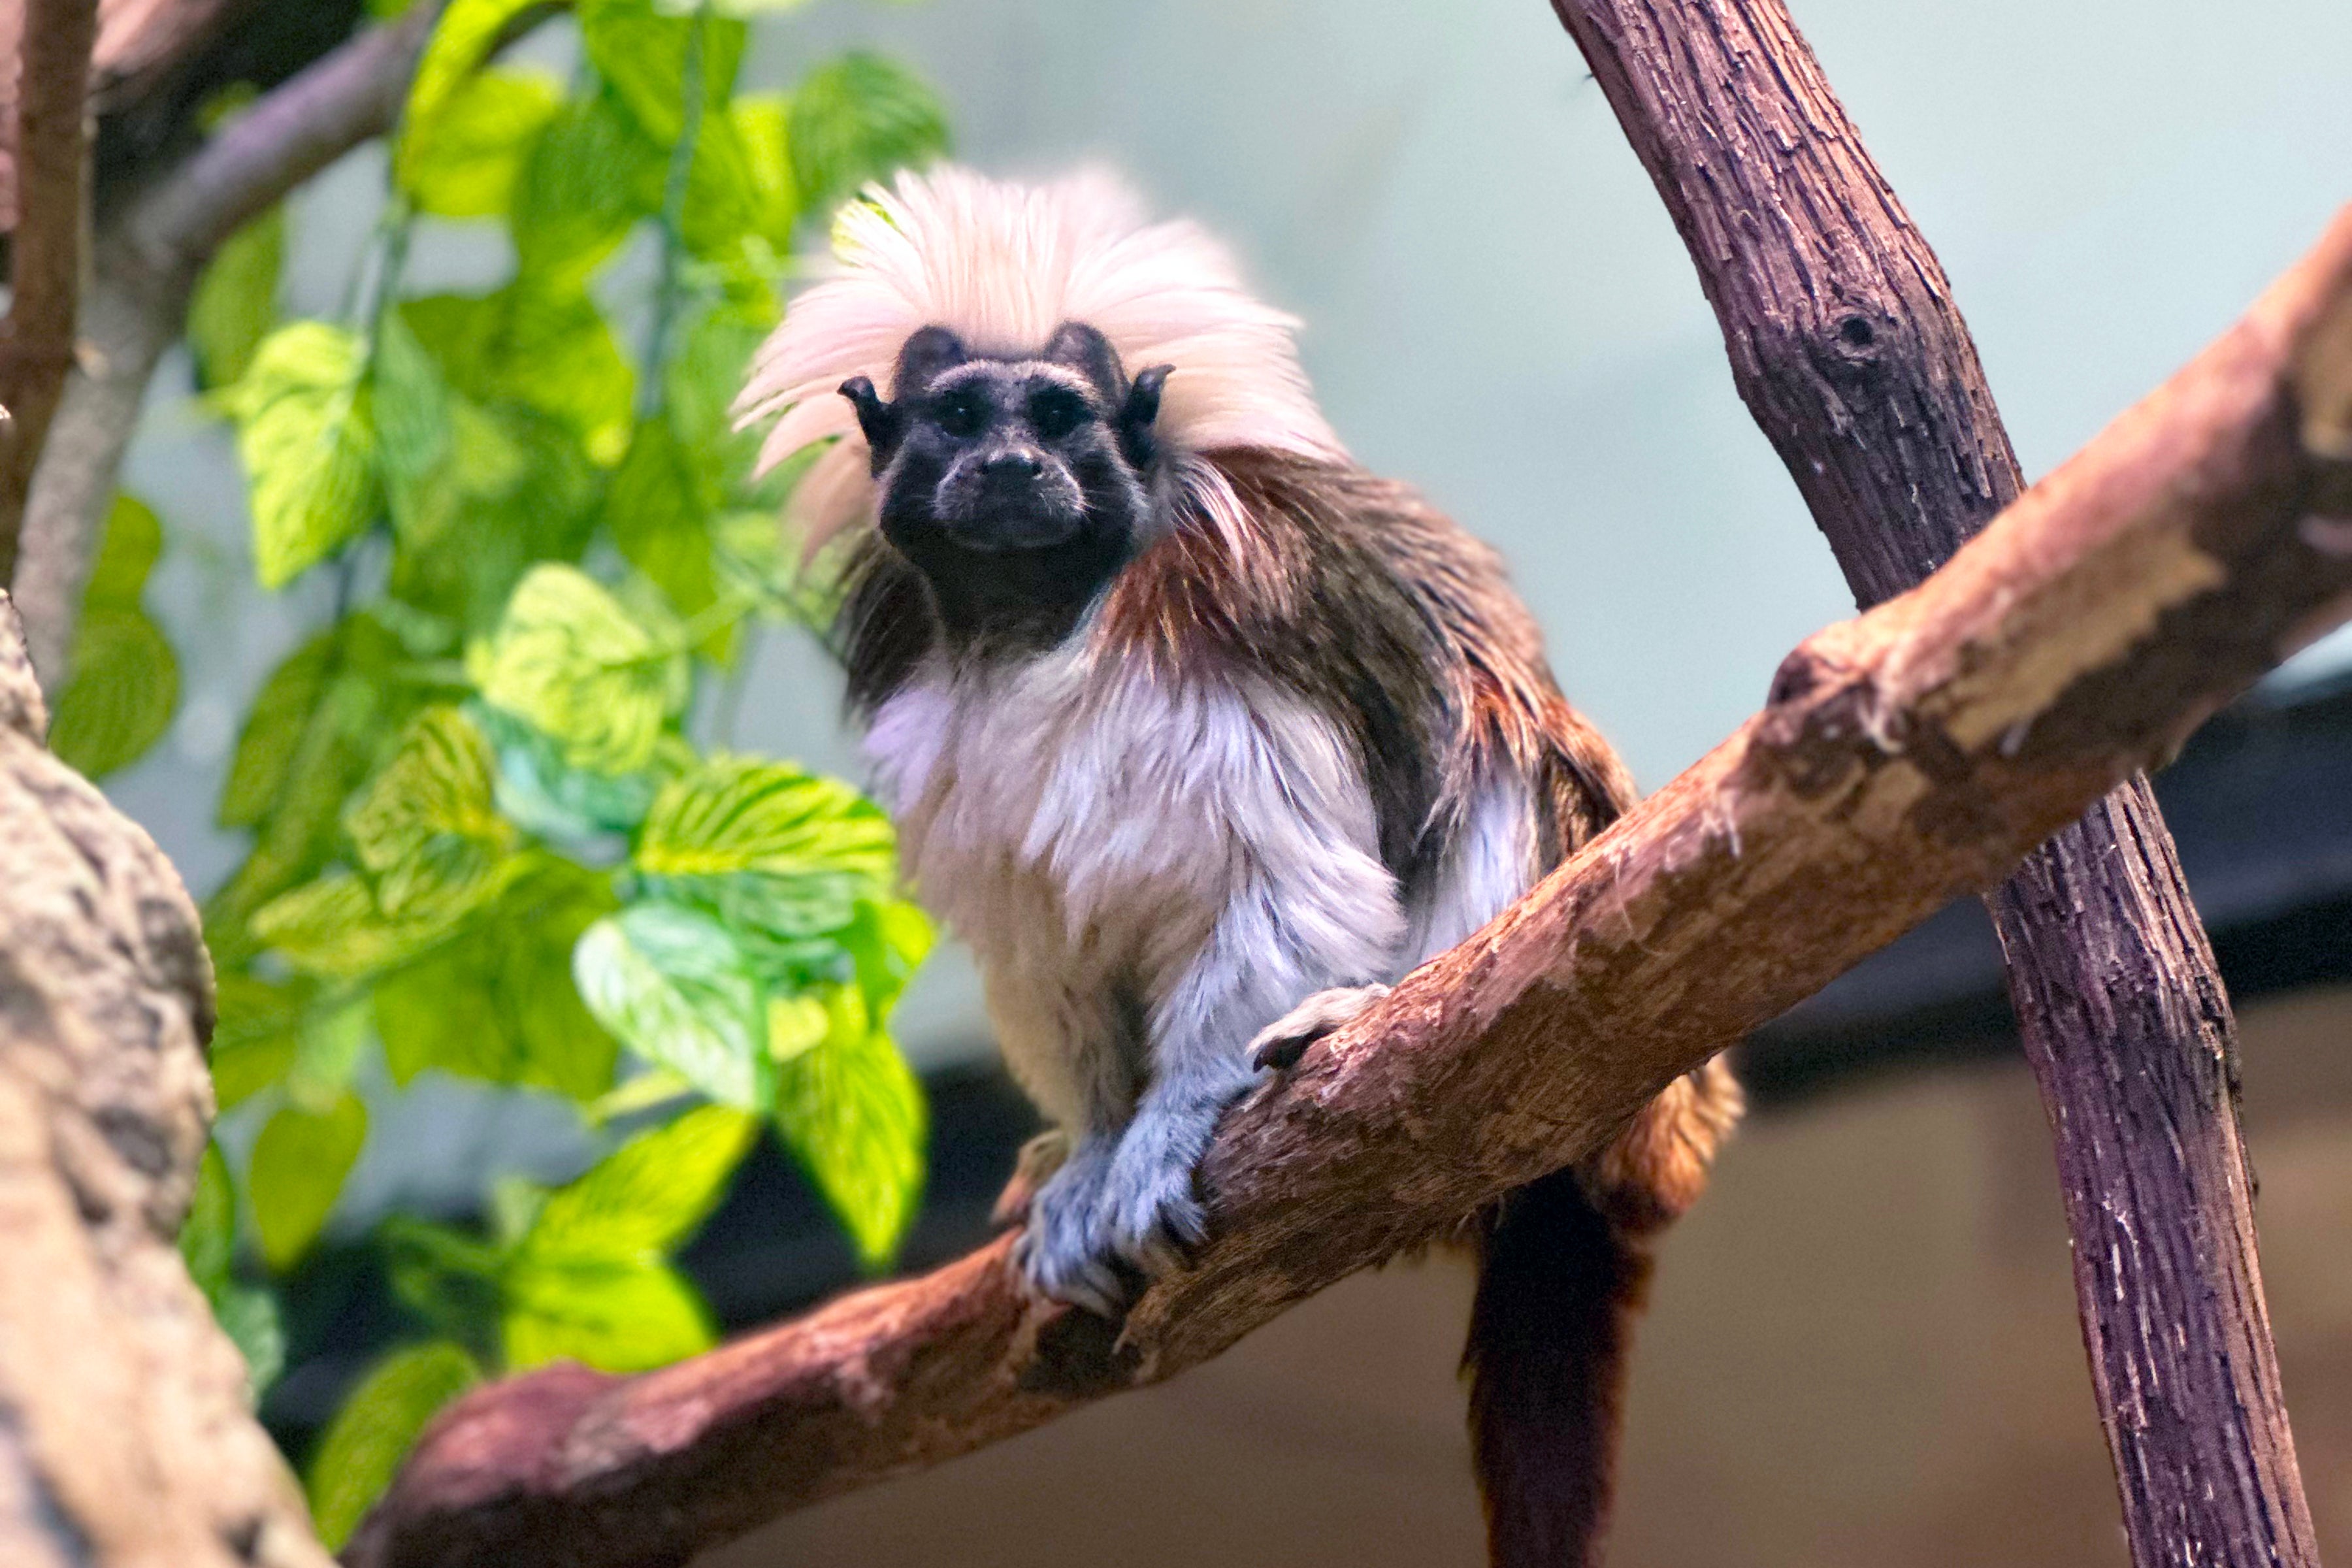 It has been 50 years since cotton-top tamarins—known for their signature white coif—have lived at NZCBI. Photo 2 credit: Kenton Kerns, Smithsonian’s National Zoo and Conservation Biology Institute